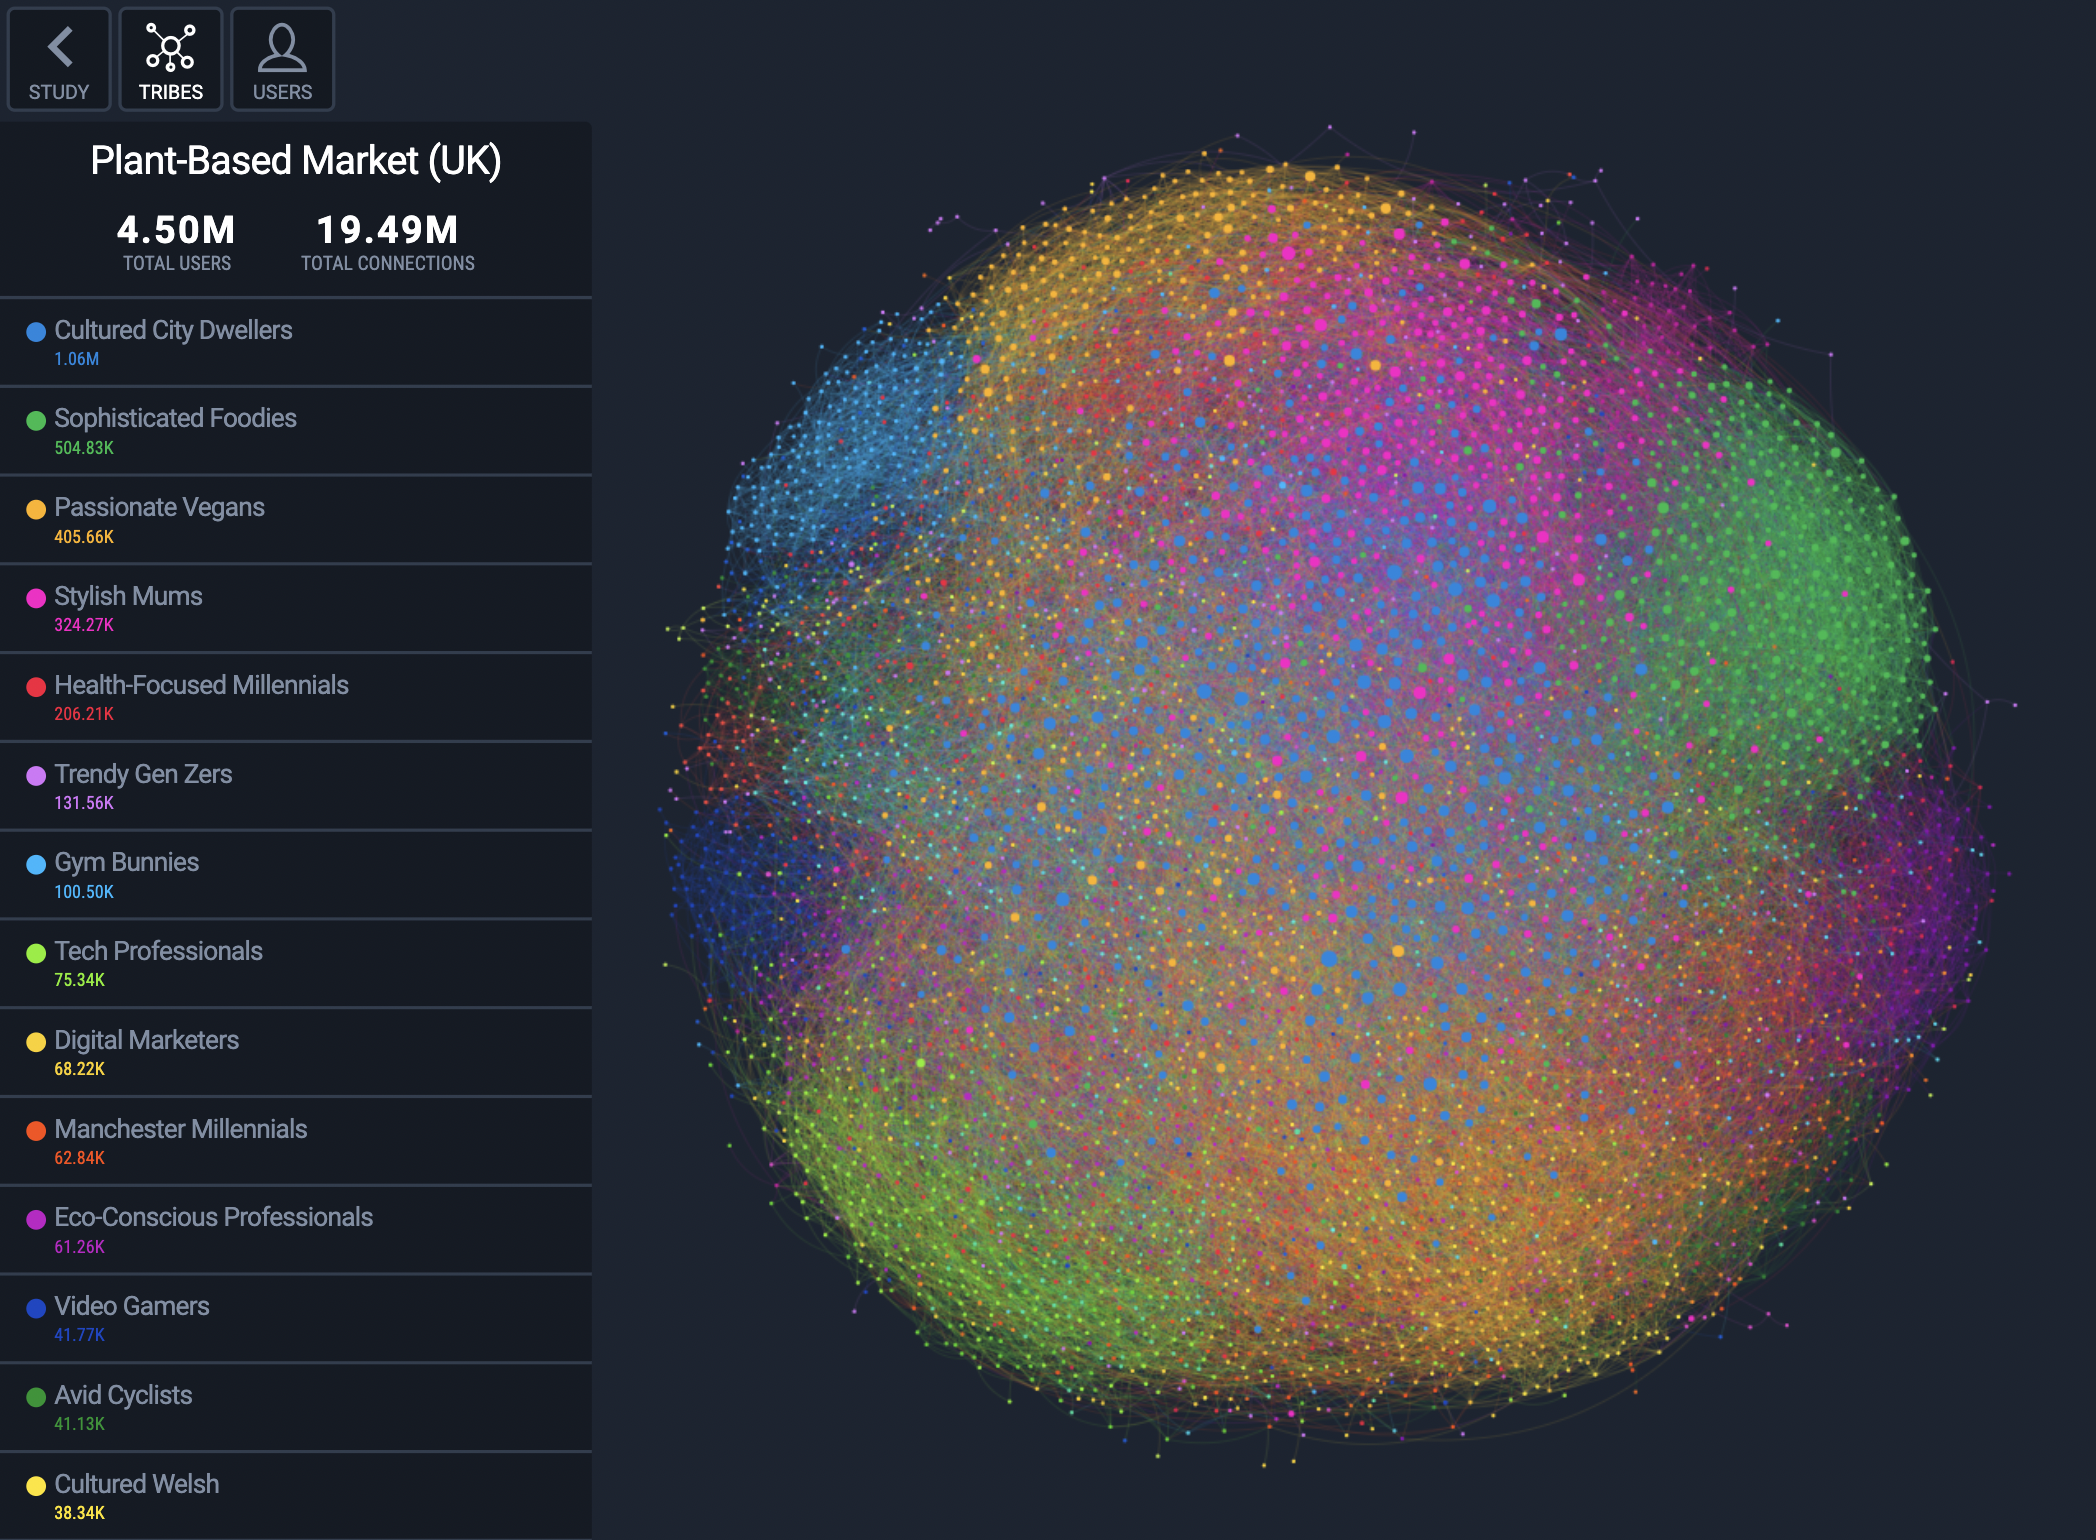 Network visualisation of the UK plant-based food market as seen on the Fifty platform.